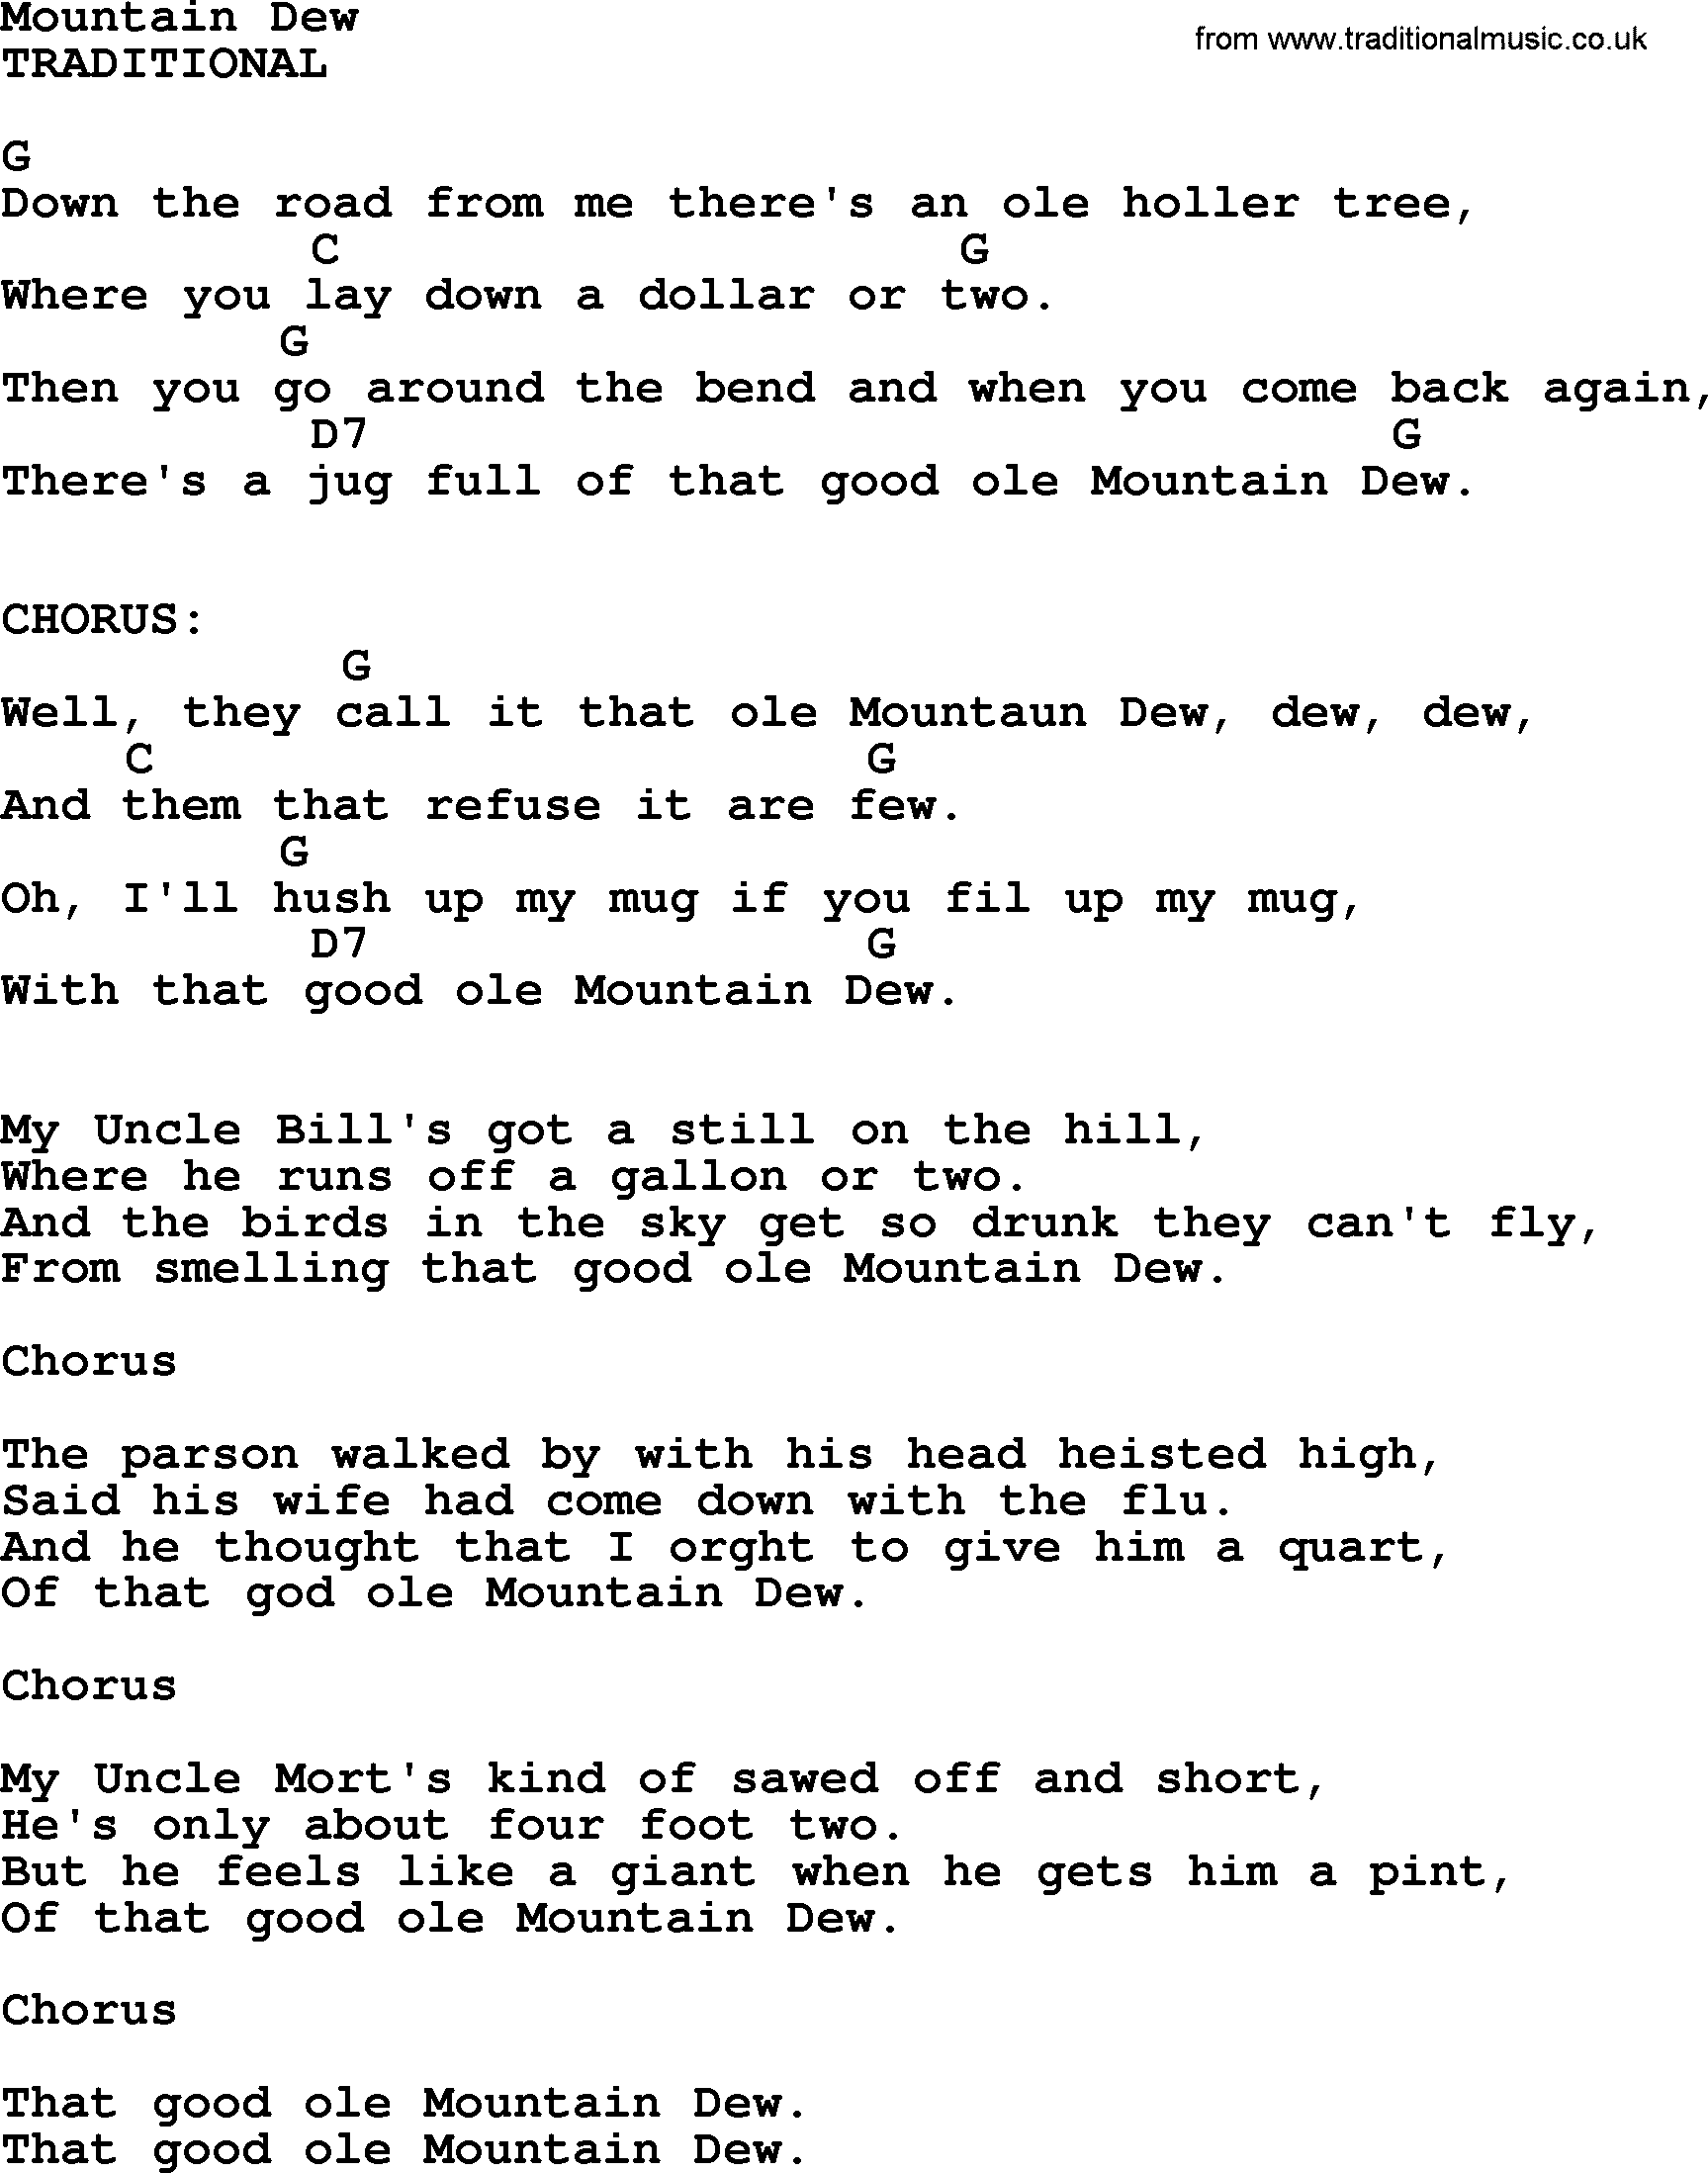 Johnny Cash song Mountain Dew, lyrics and chords